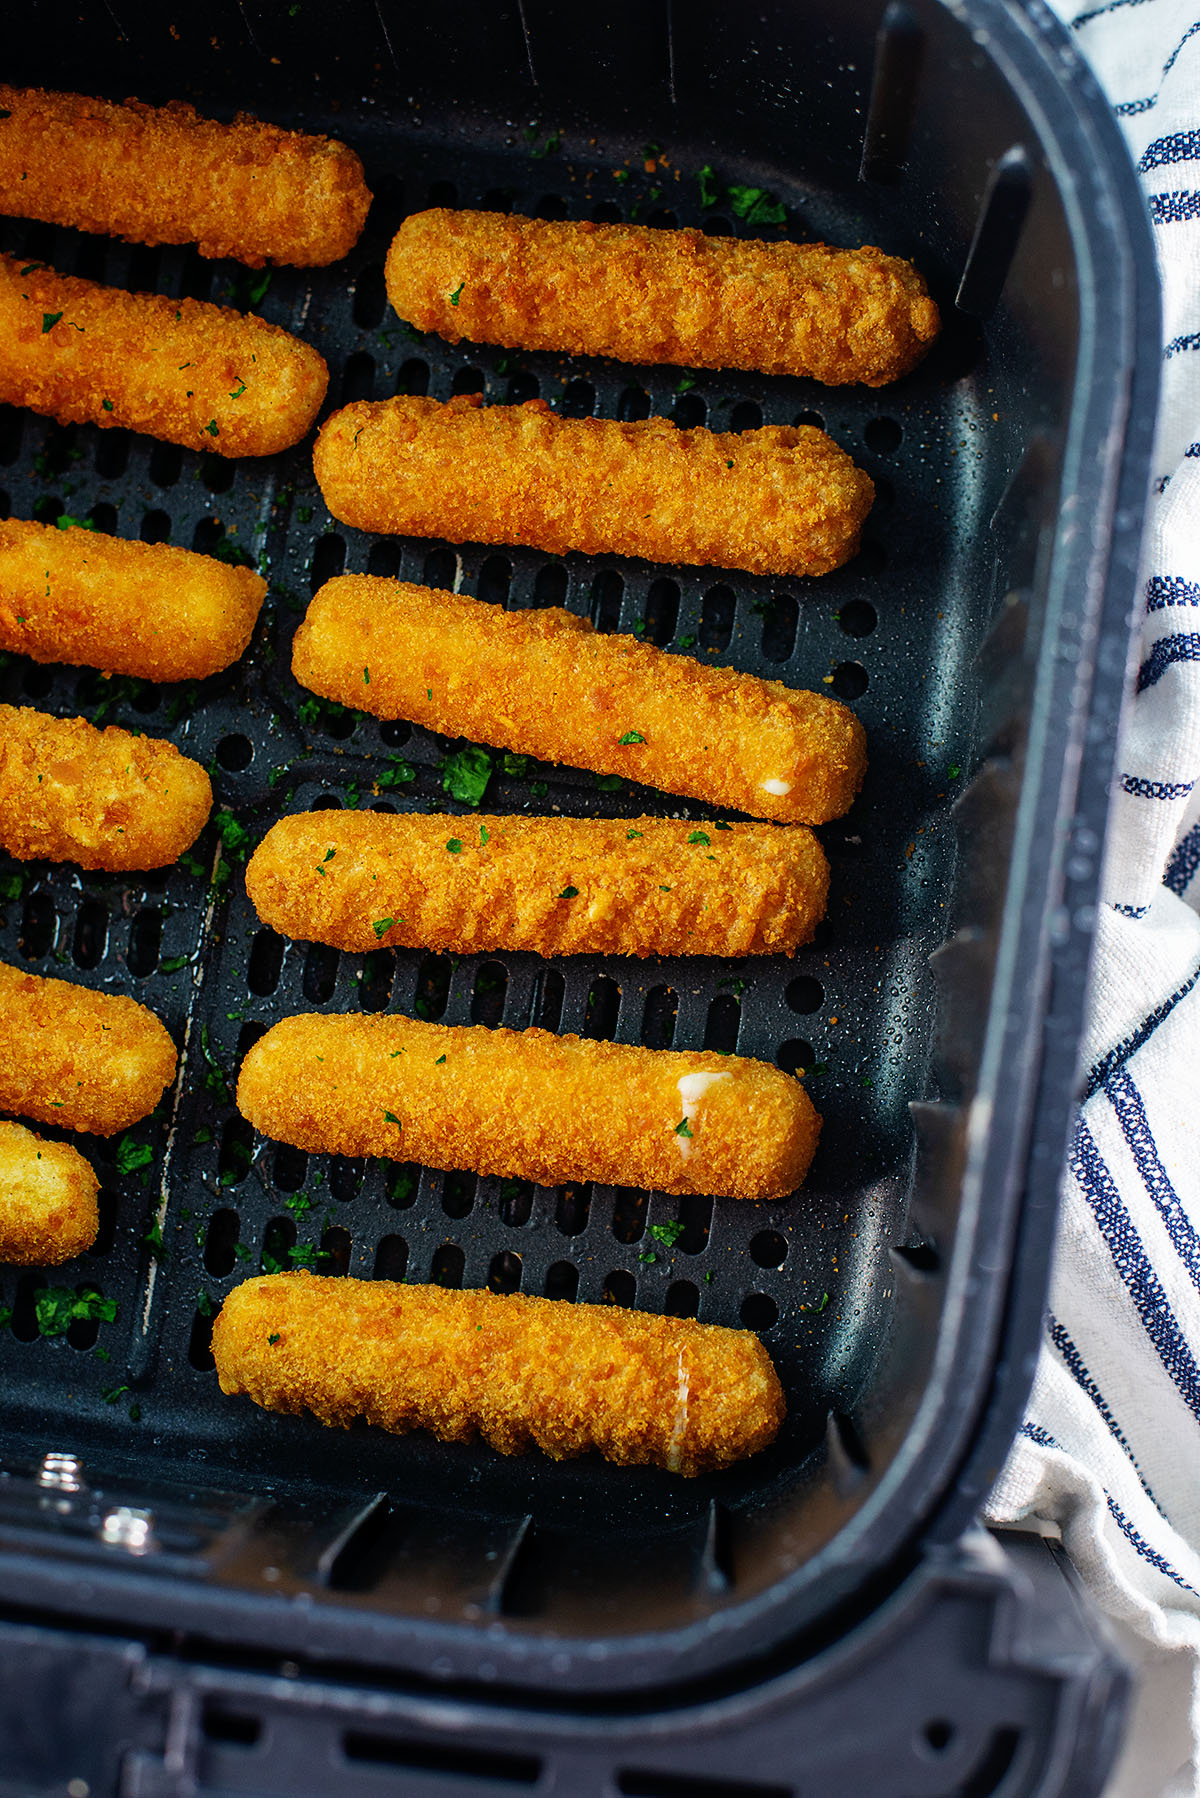 Two rows of cheese sticks in an air fryer basket.